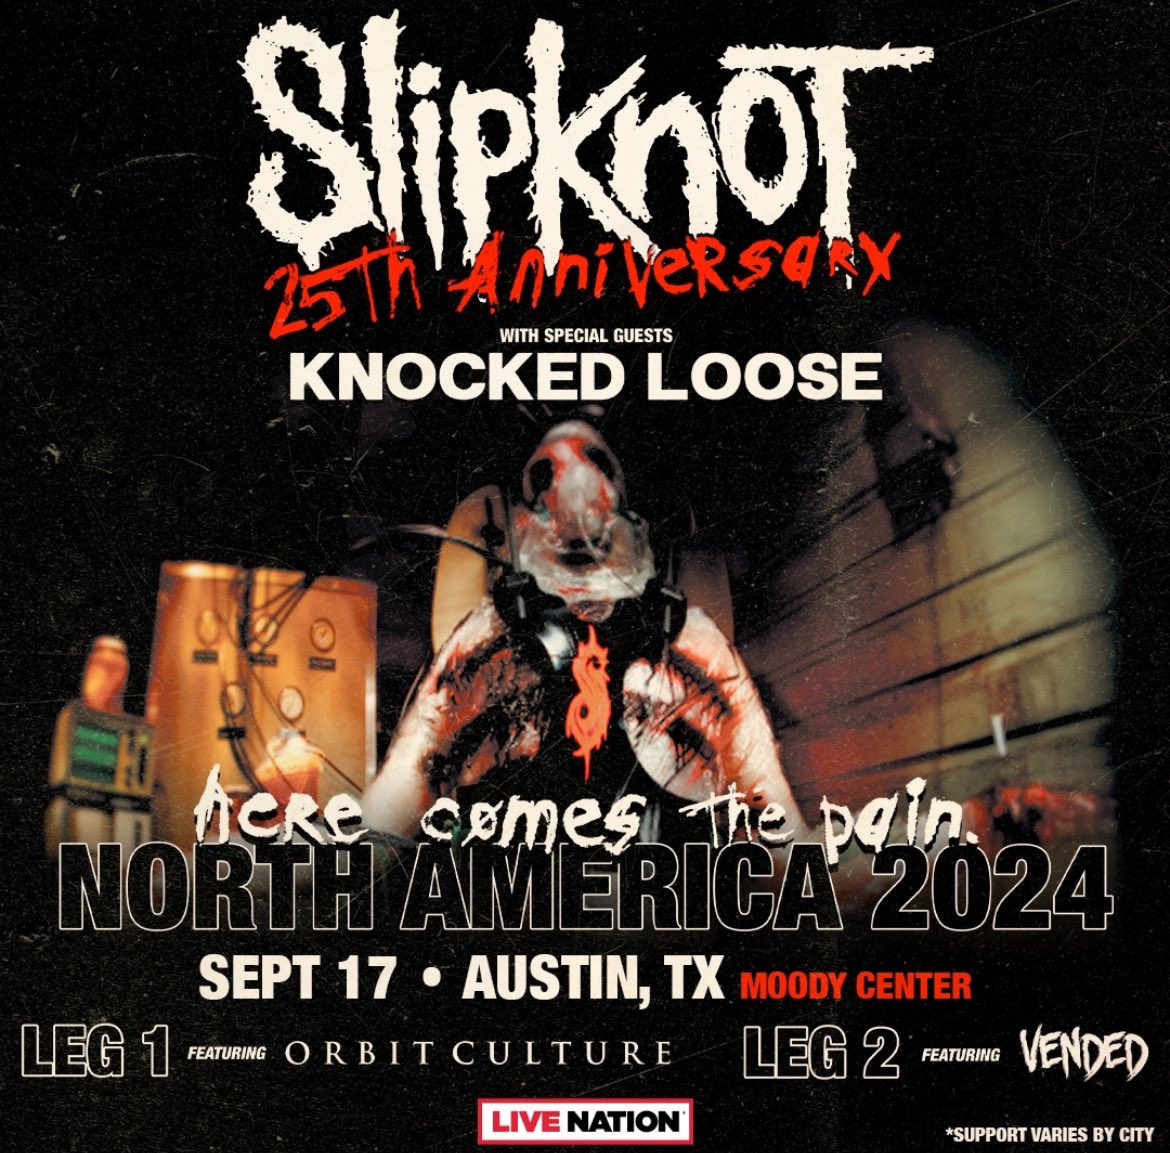 Slipknot is celebrating 25 years of chaos with their HERE COMES THE PAIN Tour! Catch them with @knockedloose and @OfficialVended at @MoodyCenterATX on September 17th. Presale: Thurs, May 2 at 10am (Code: LADYBIRD) Onsale: Fri, May 3 at 10am atxconcert.com